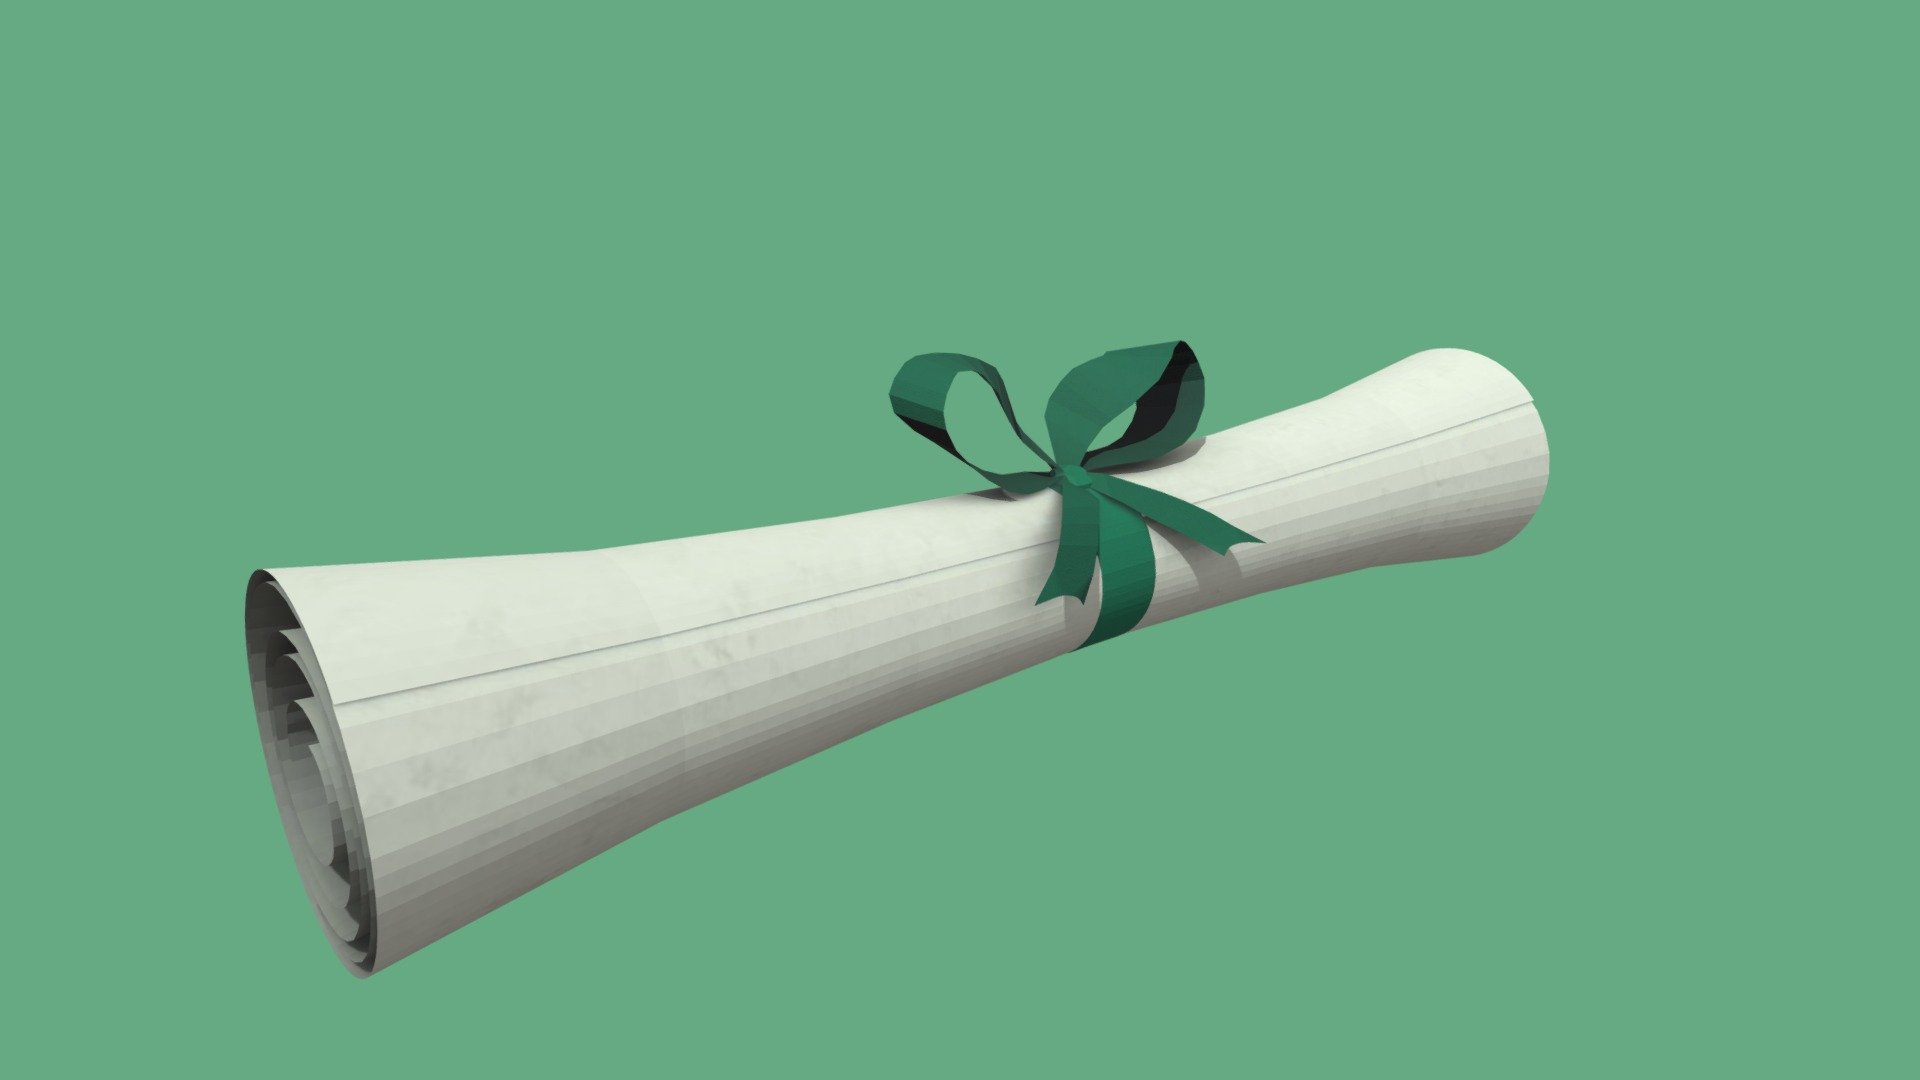 A 3d model of a diploma scroll. [Made with Blender 2.8]

This is a commission.

Commission Type: Basic - Diploma [Commission #2] - 3D model by Memorie 3d model